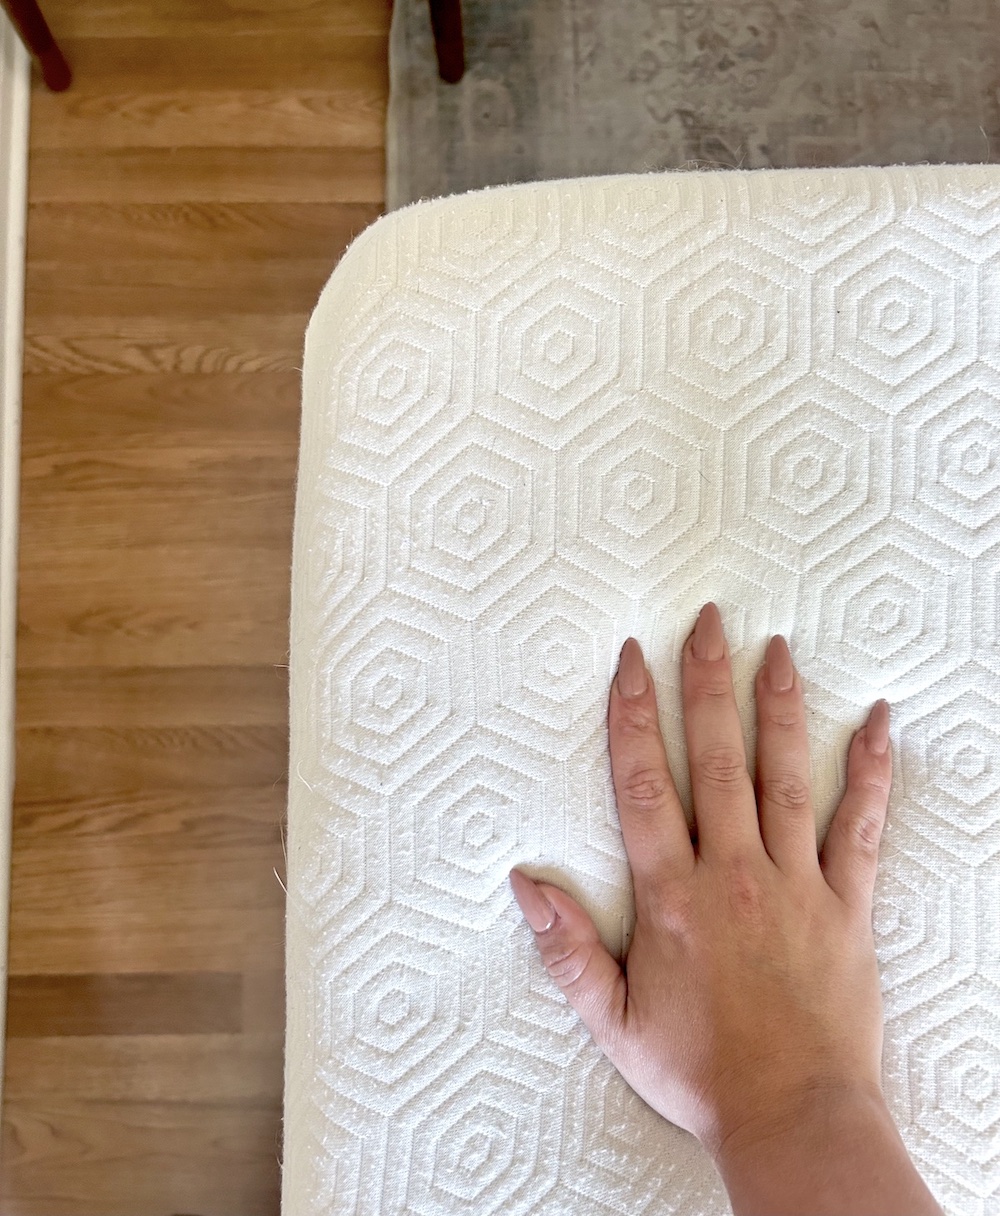 A hand resting on a white, organic mattress cover with a hexagonal pattern. The background includes a wooden floor and part of a rug.